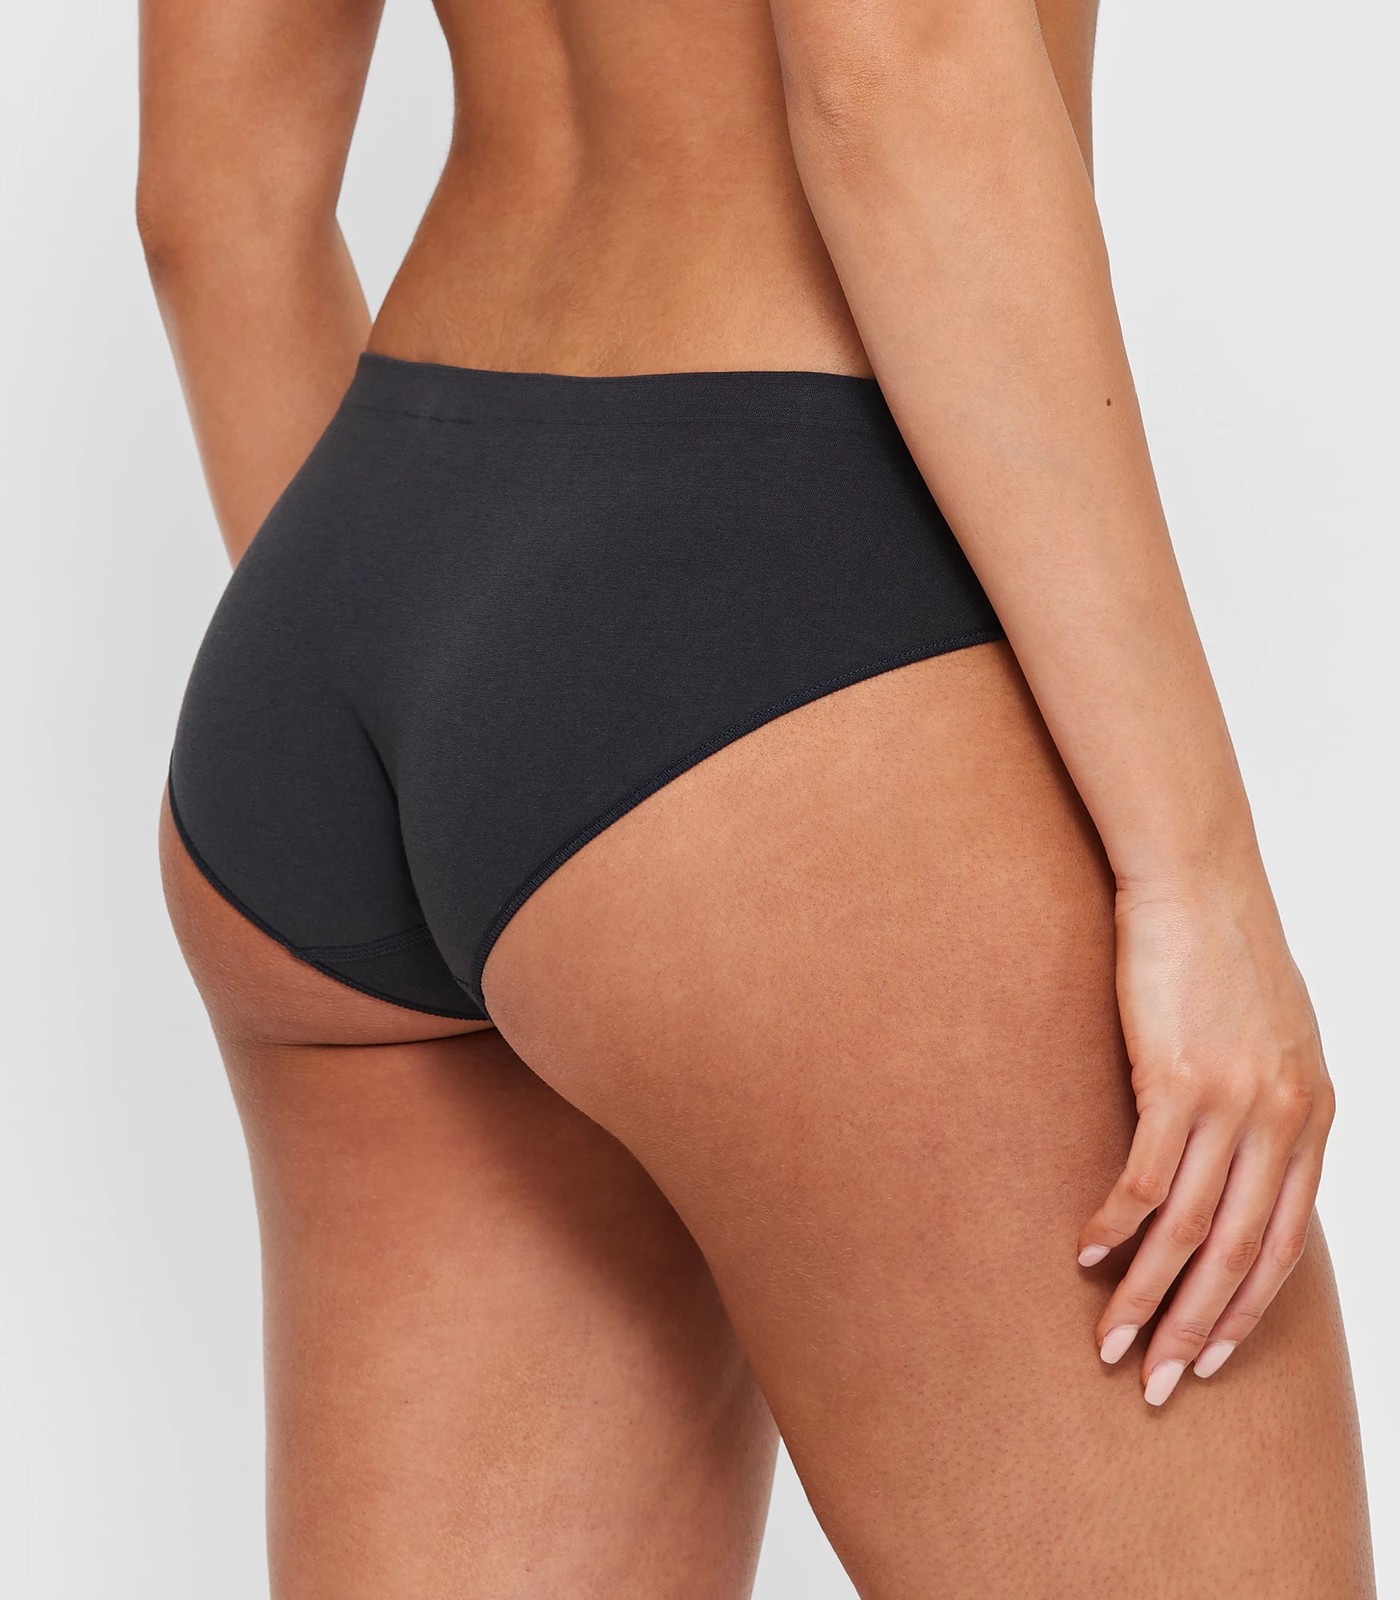 Bonds Seamless Full Brief Size 12 Assorted 2 Pack